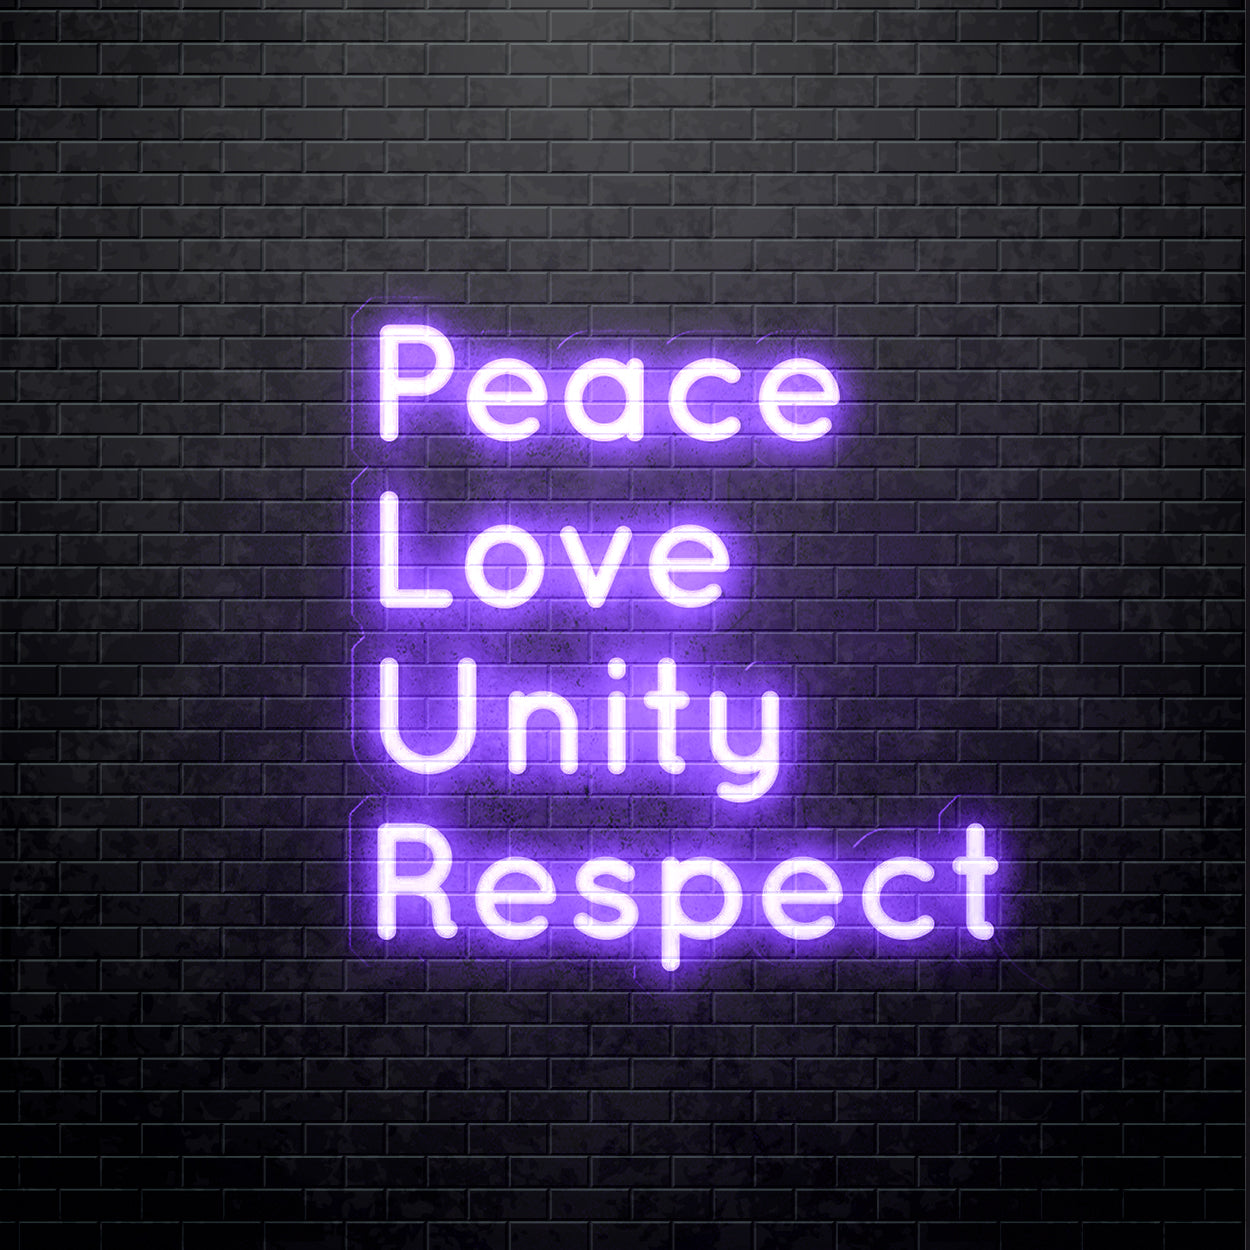 LED Neon sign - Peace - love - unity - respect